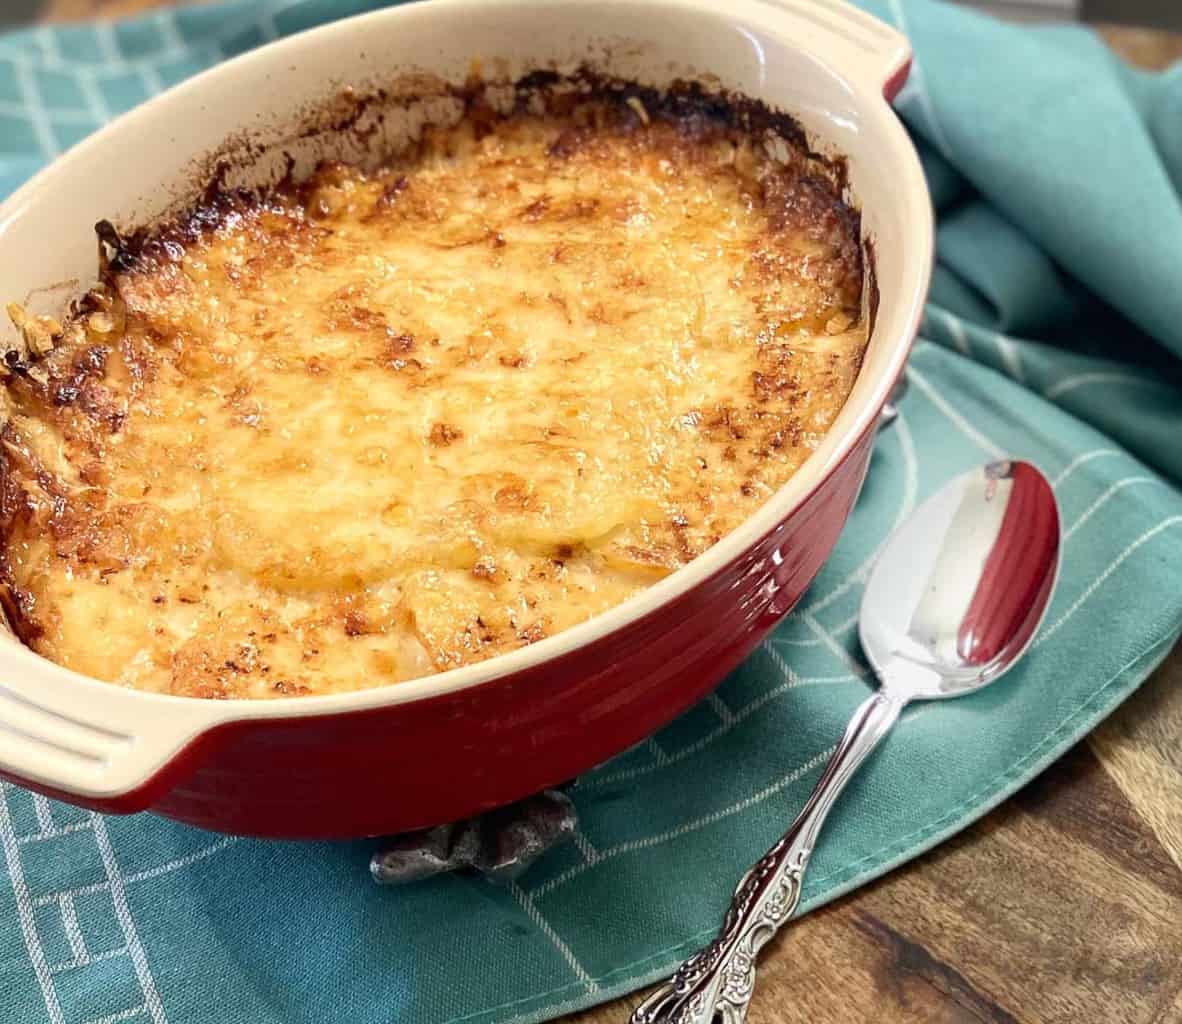 Scalloped potatoes in oval baking dish.